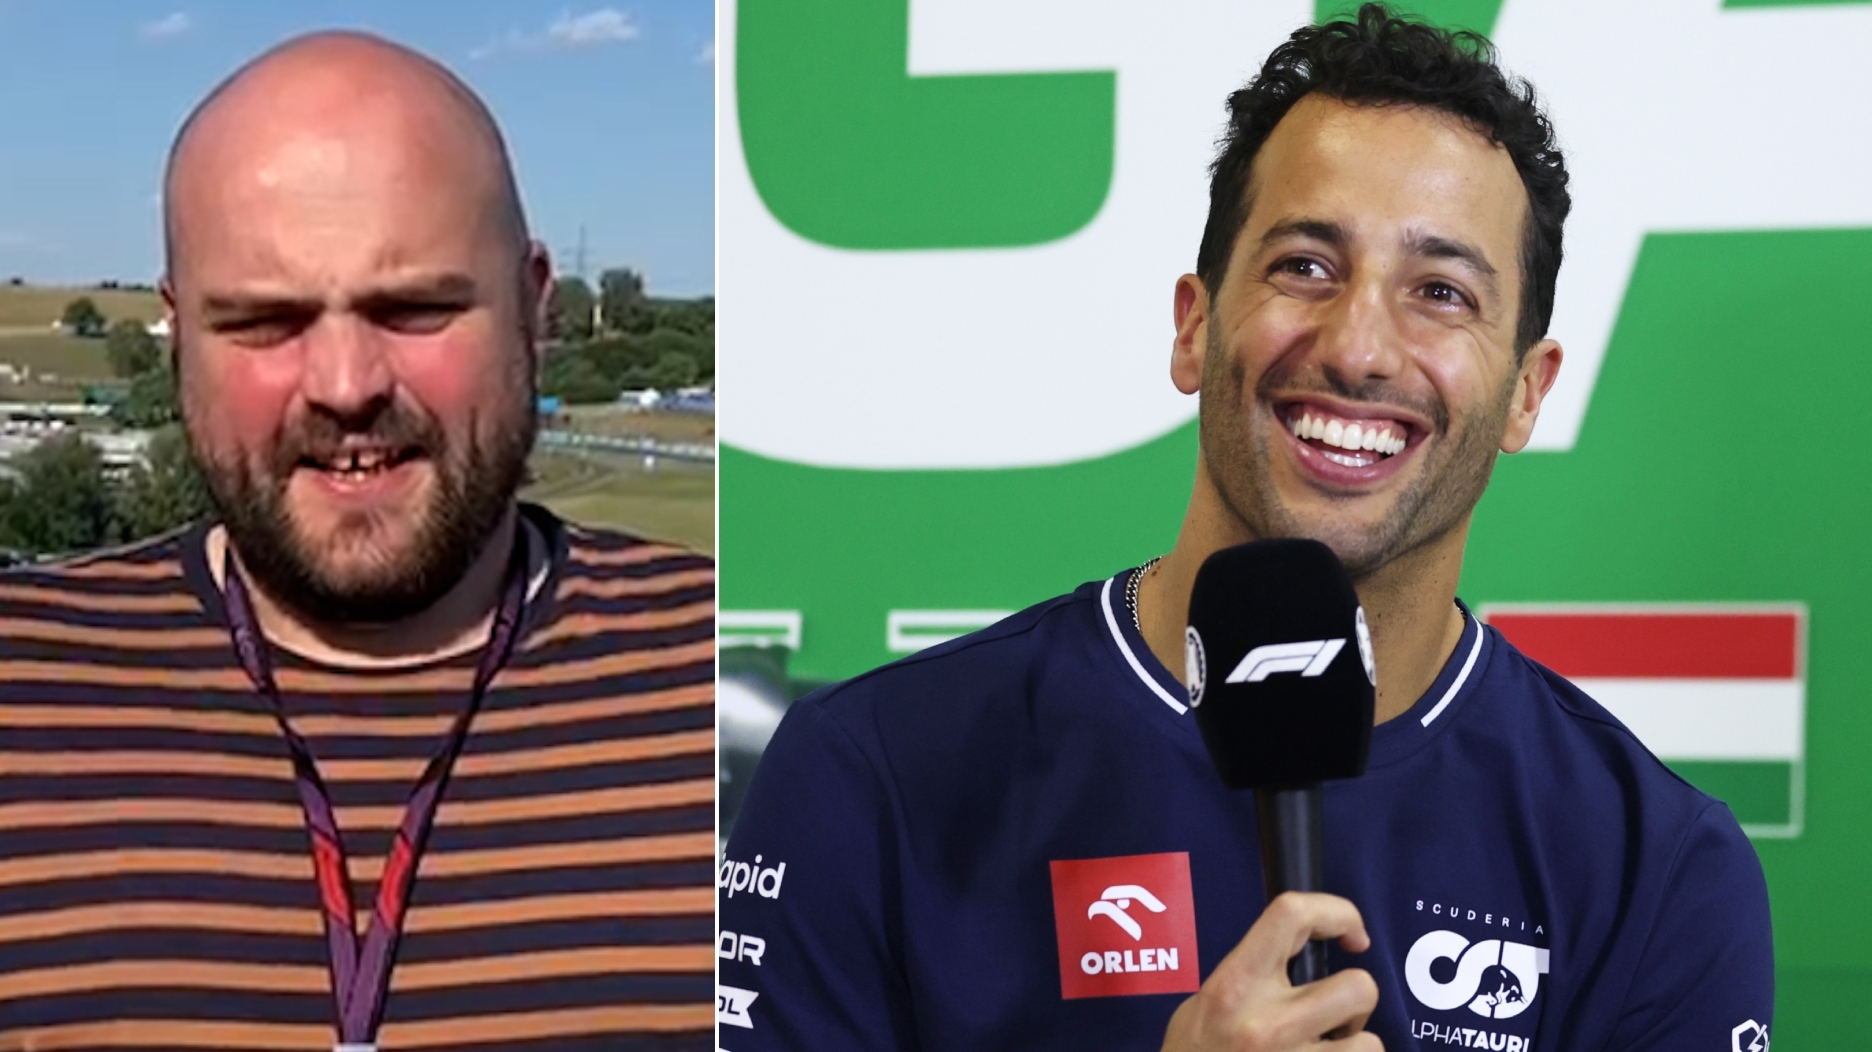 Saunders Ricciardo is pumped on F1 return despite low expectations - Stream the Video